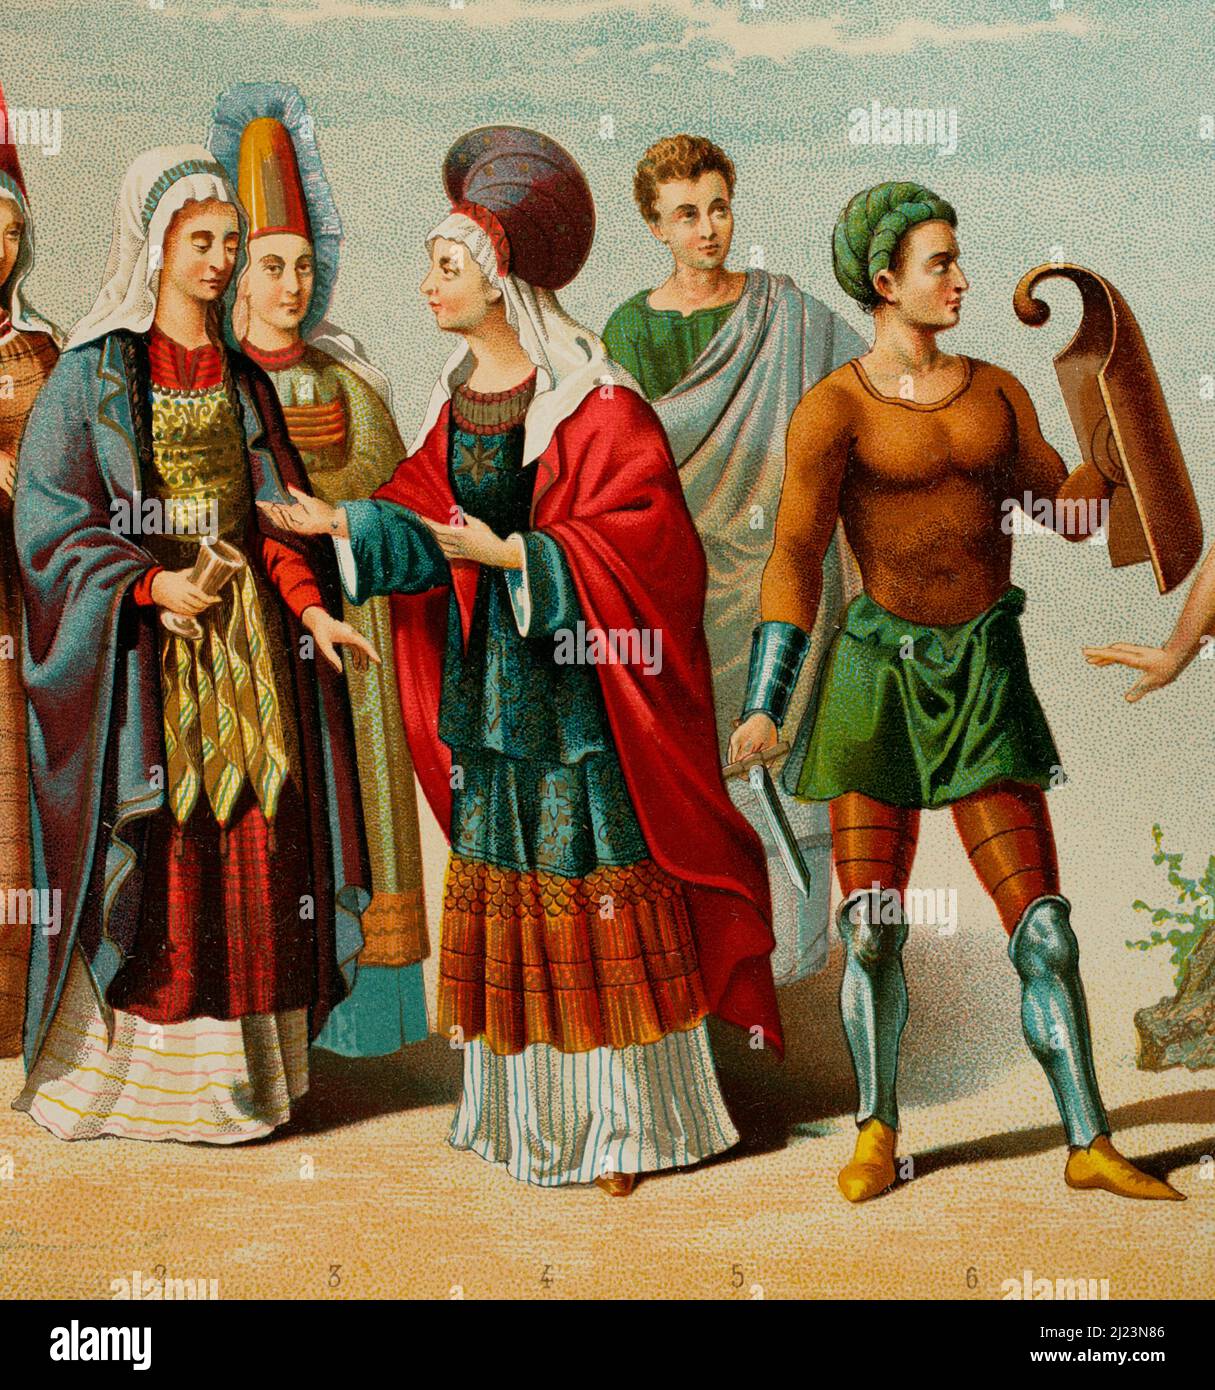 Iberian Peninsula. Ancient History. Phoenicians. Figures 2 to 5: illustrations inspired by antiquities from the Cerro de los Santos. Figure 6: Phoenician from a small lamp in the Museum of Tarragona. Chromolithography. Historia General de España, by Modesto Lafuente. Volume I. Published in Barcelona, 1877. Stock Photo